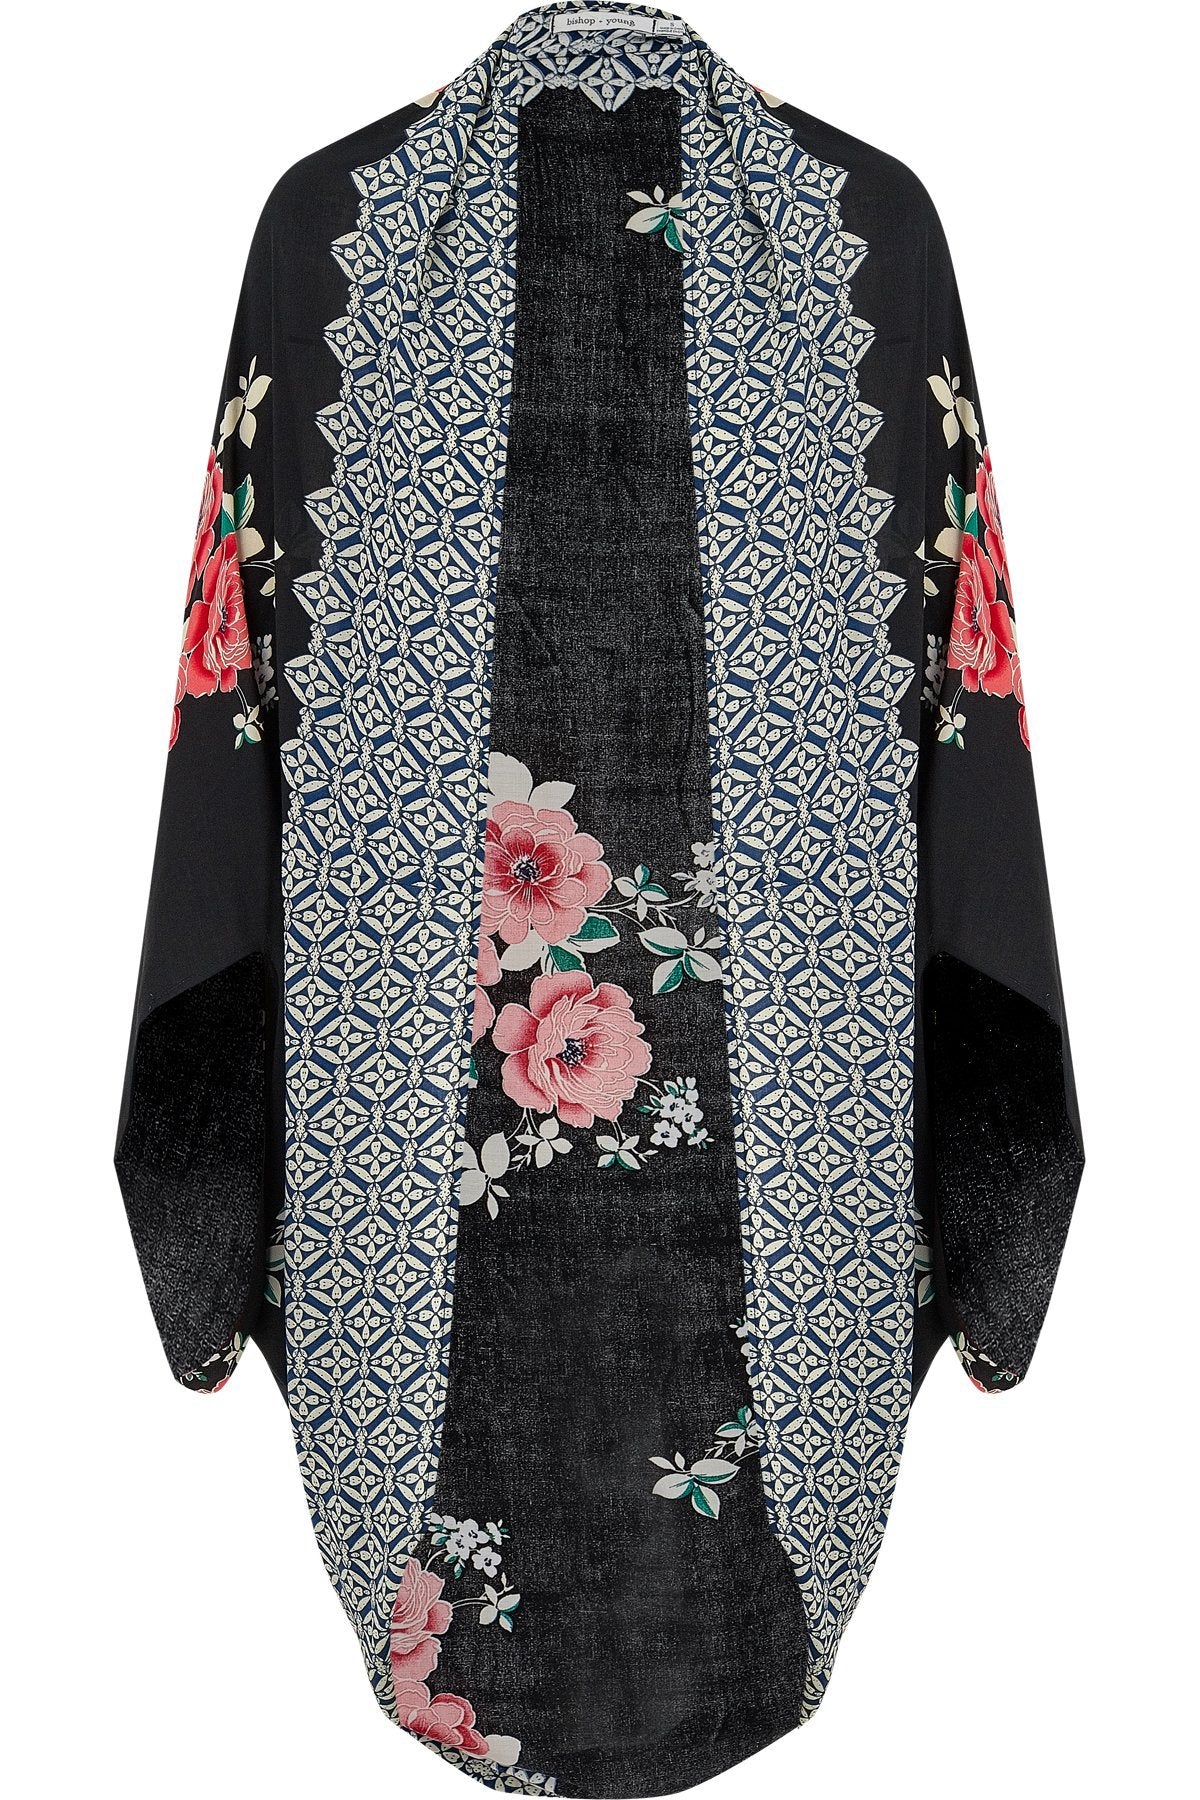 Black Floral Fly Away Kimono at the MARIA VINCENT Boutique – Maria ...